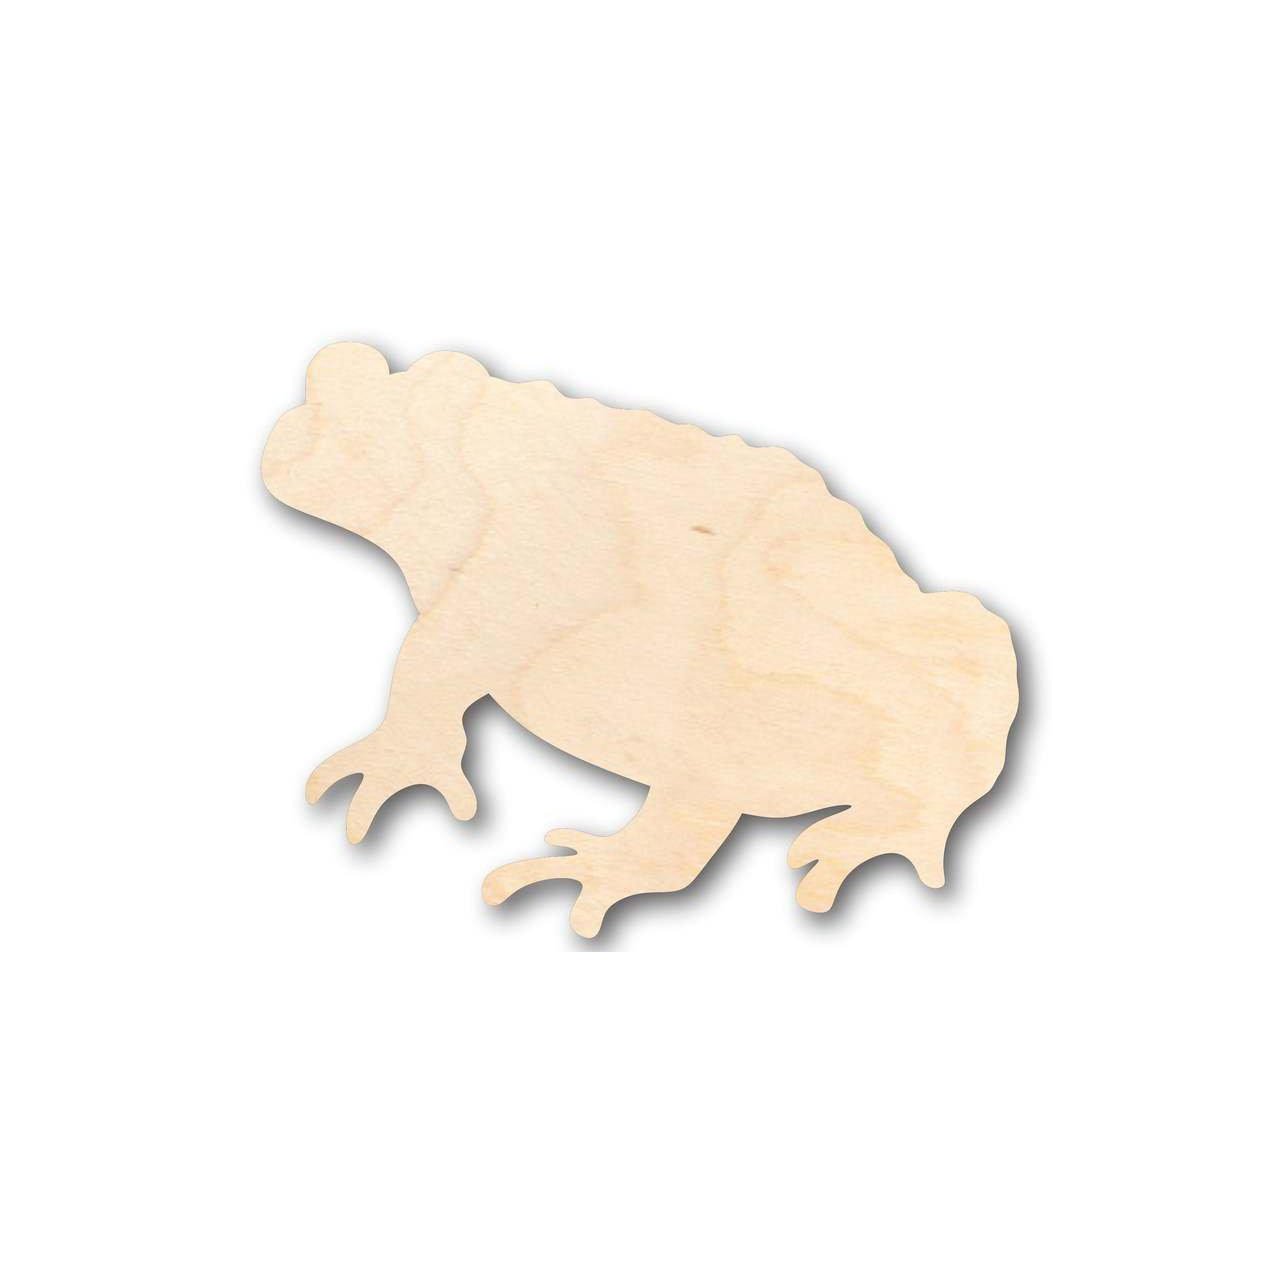 Unfinished Wooden Toad Shape - Animal - Craft - up to 24